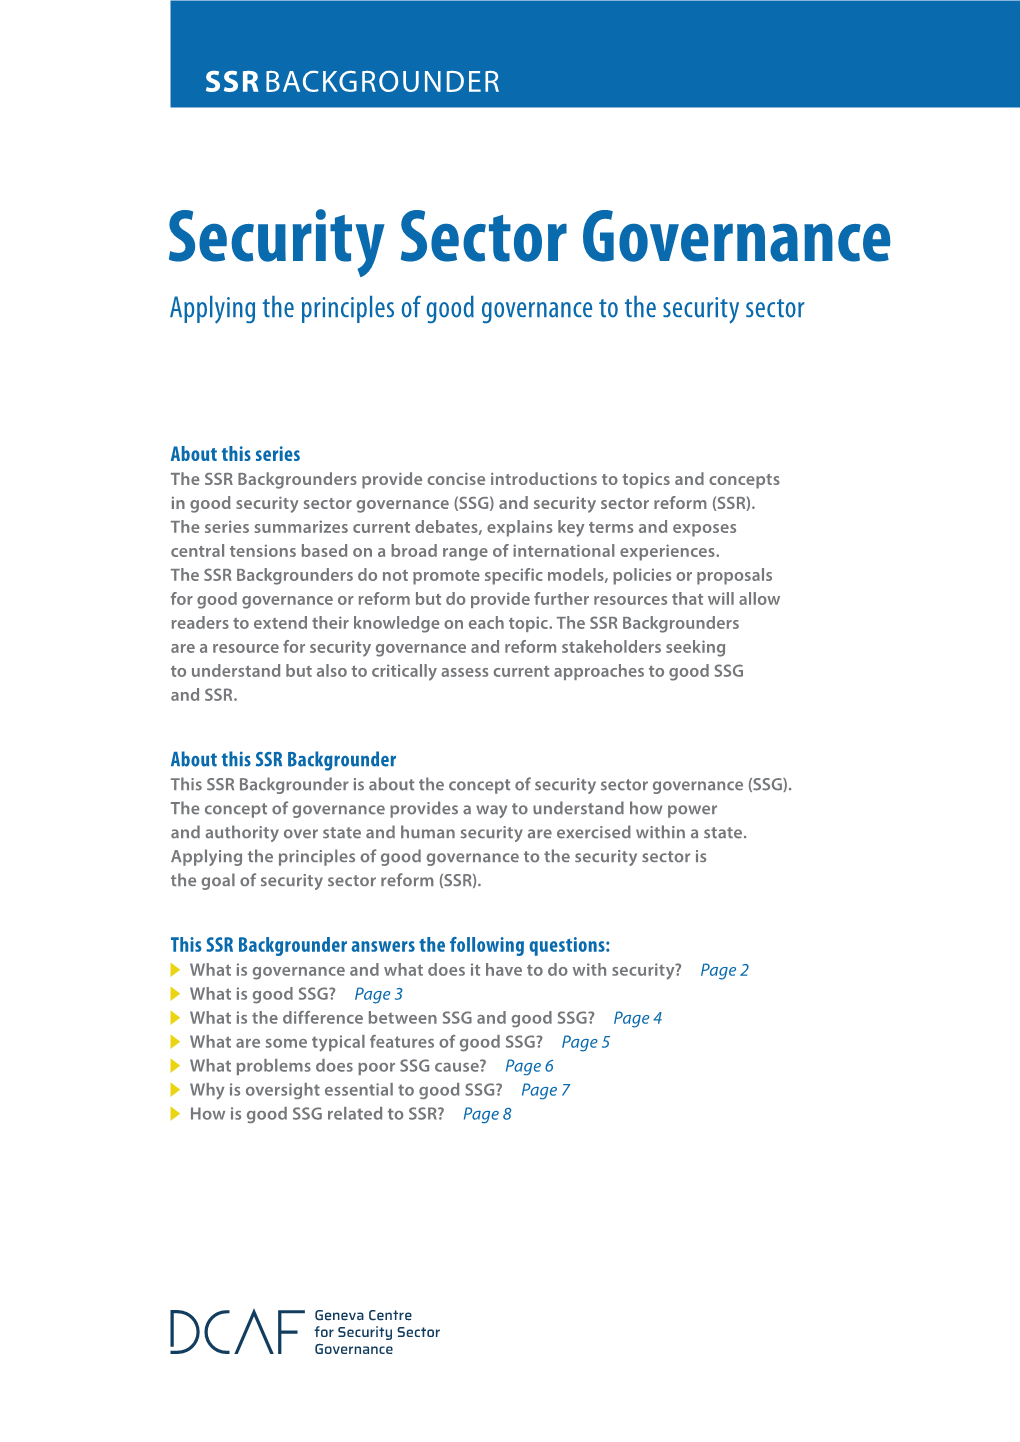 Security Sector Governance Applying the Principles of Good Governance to the Security Sector